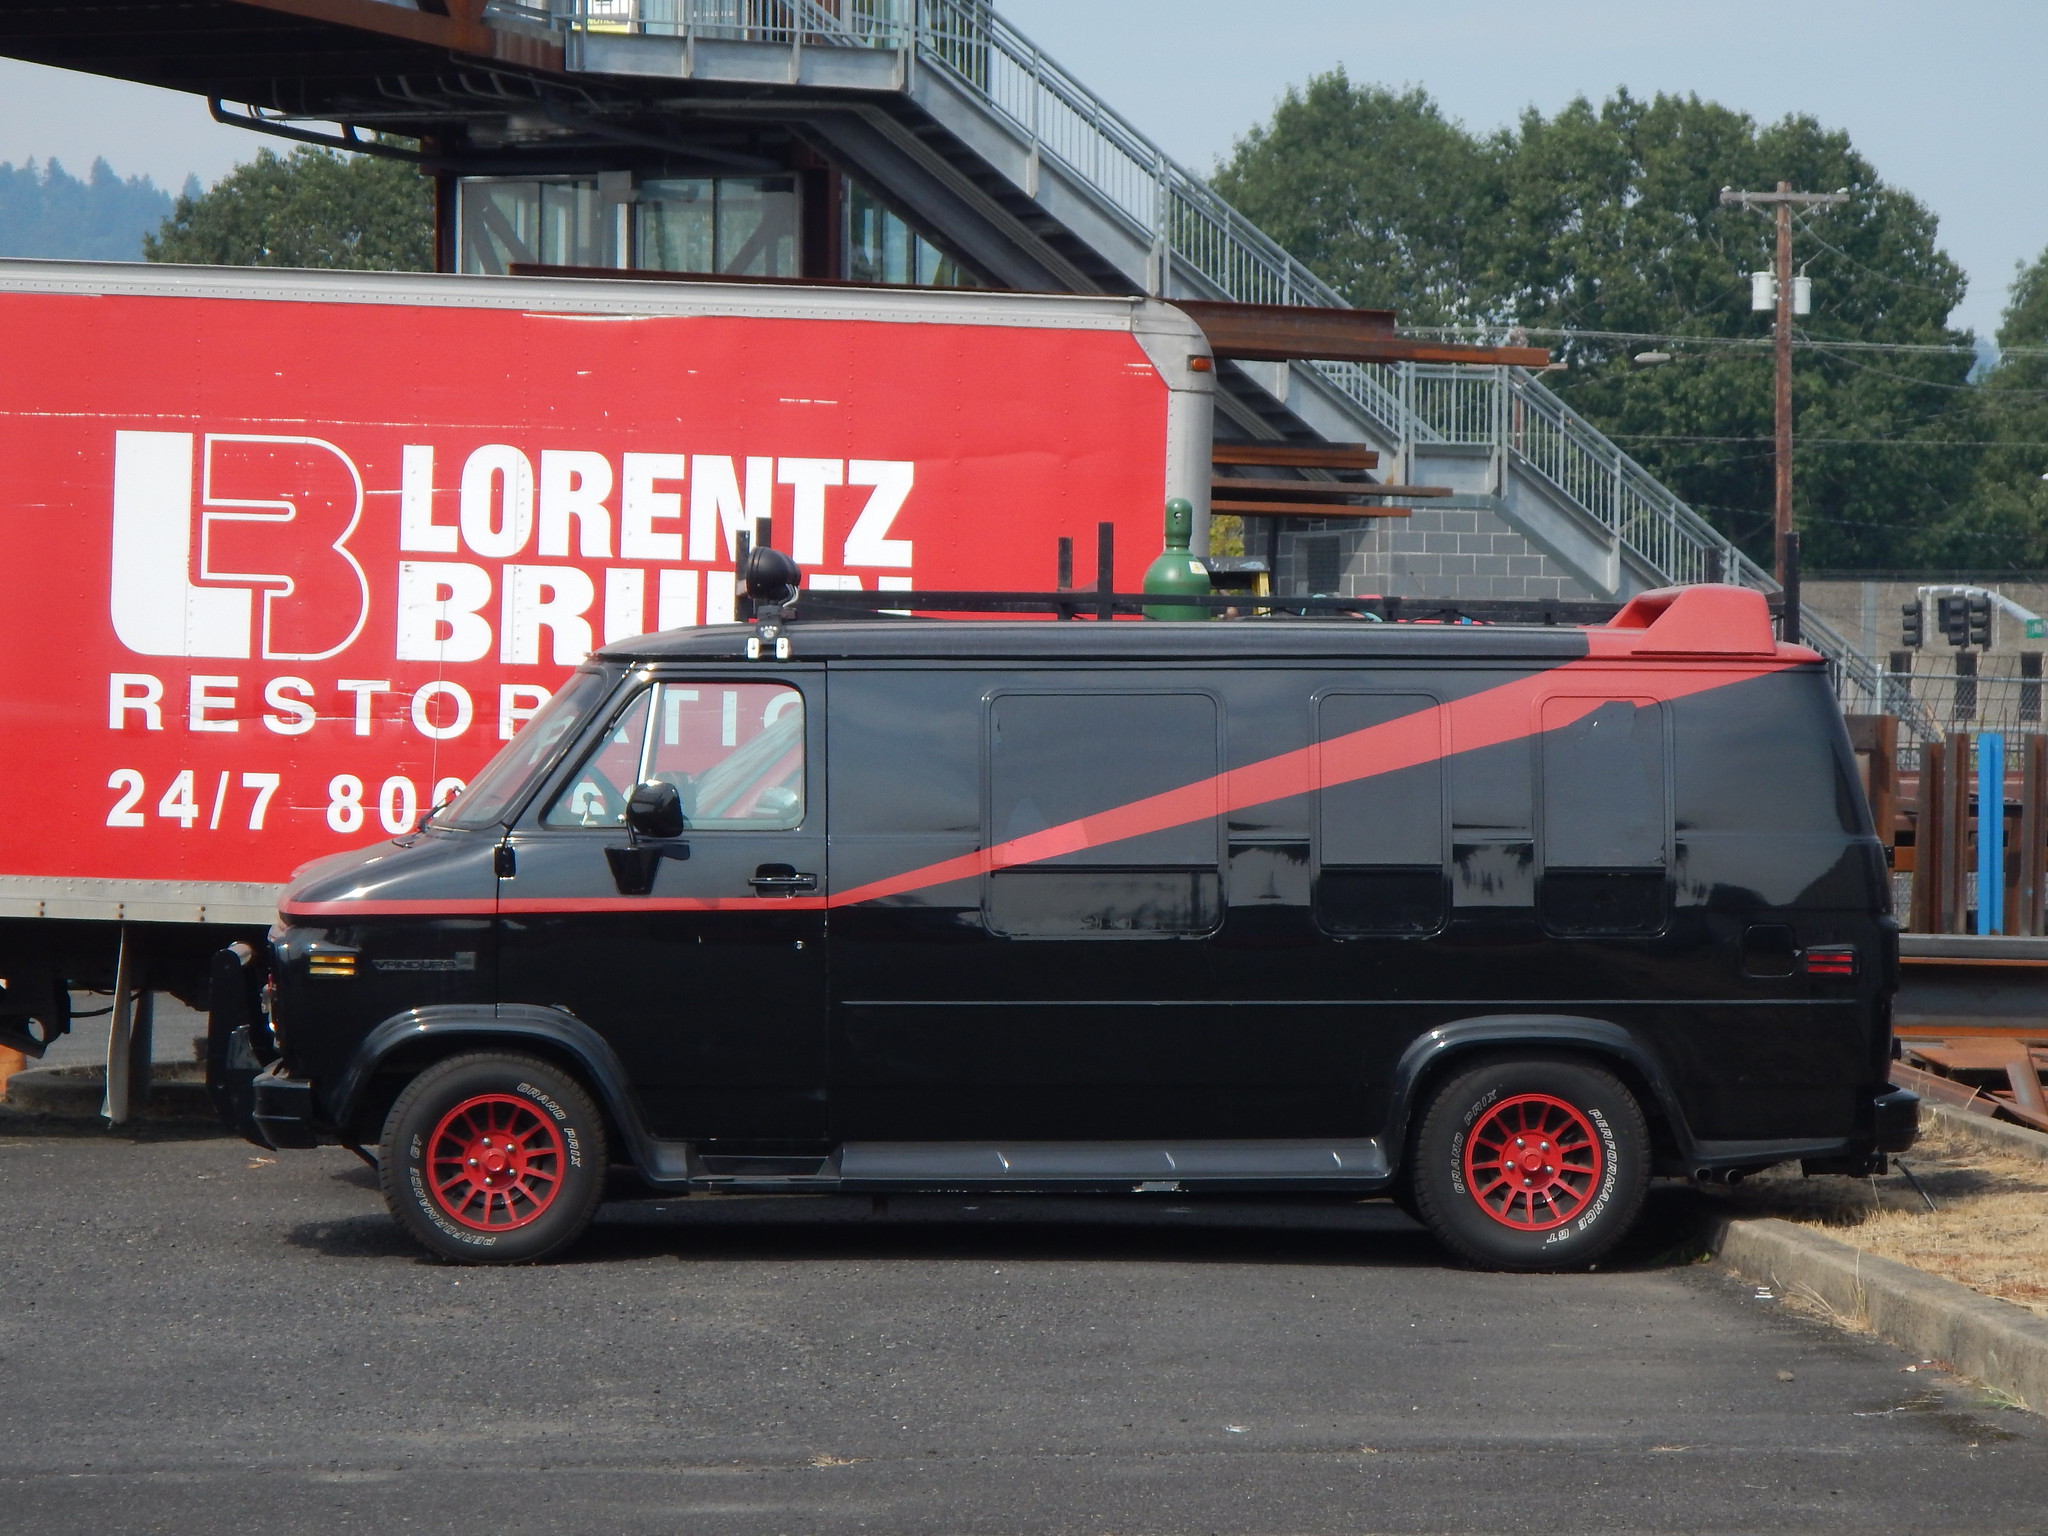 The A-Team” Van: History of the Classic 